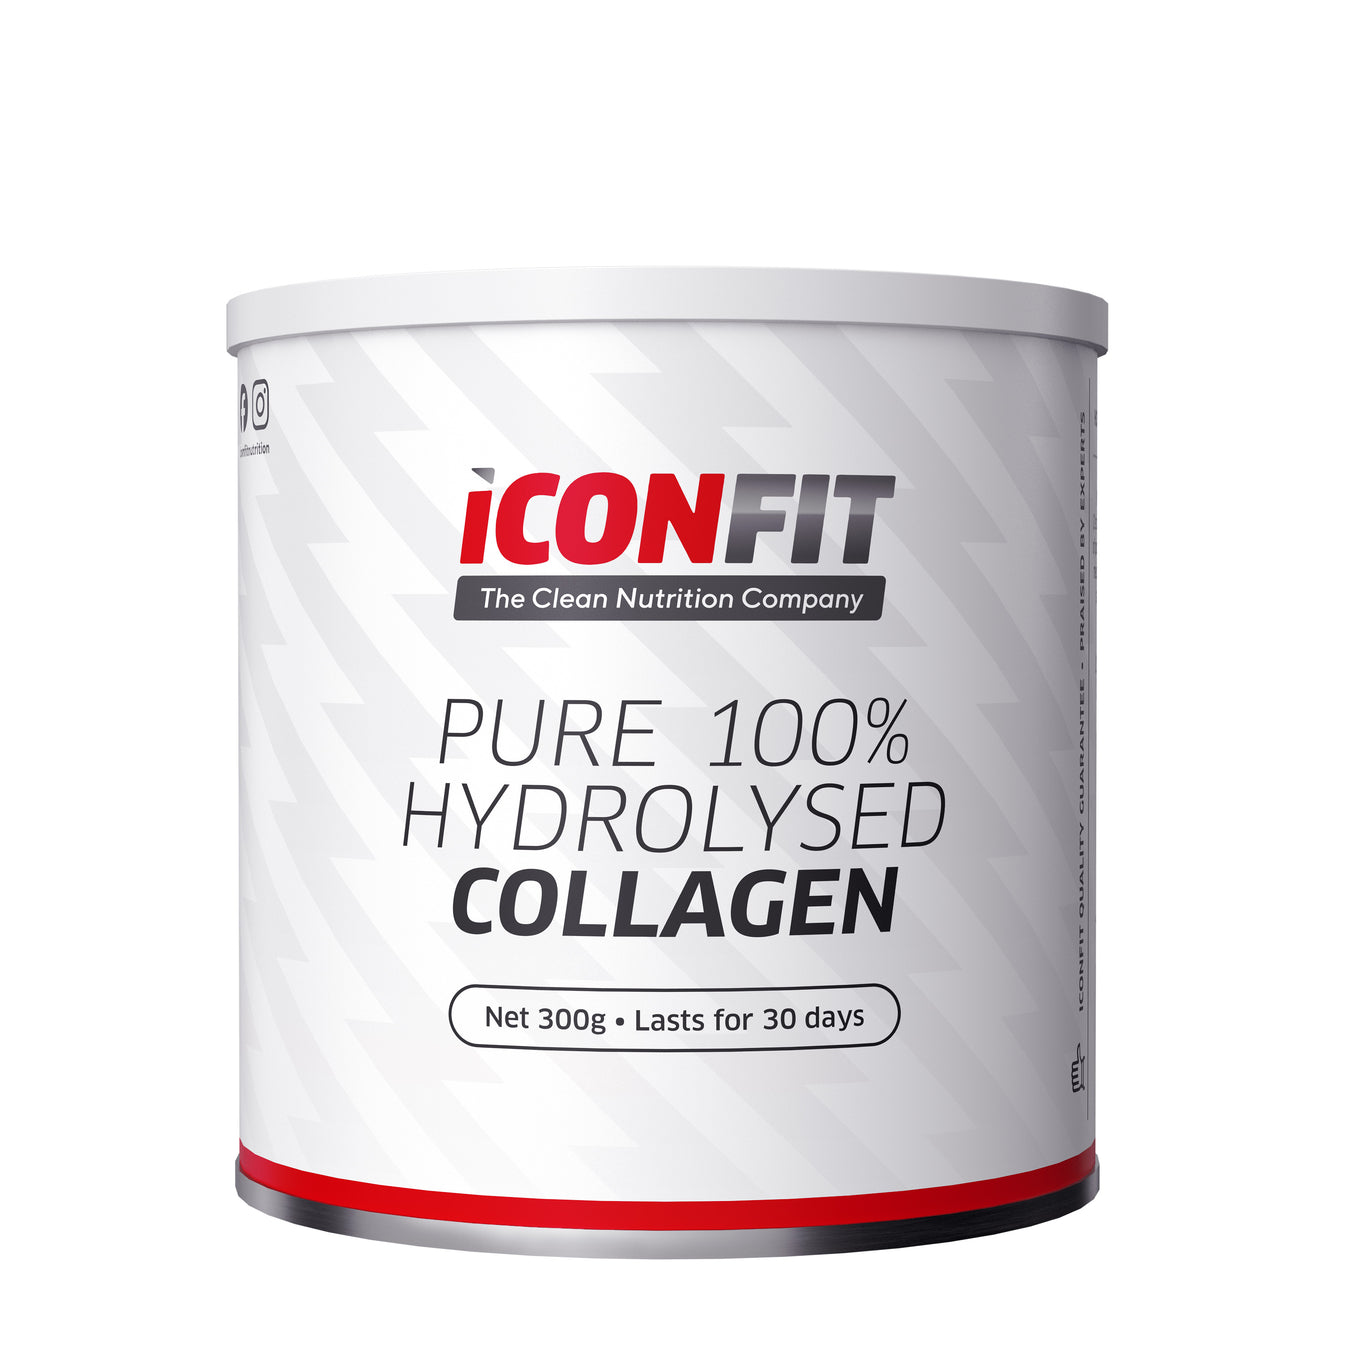 Pure-Hydrolysed Collagen